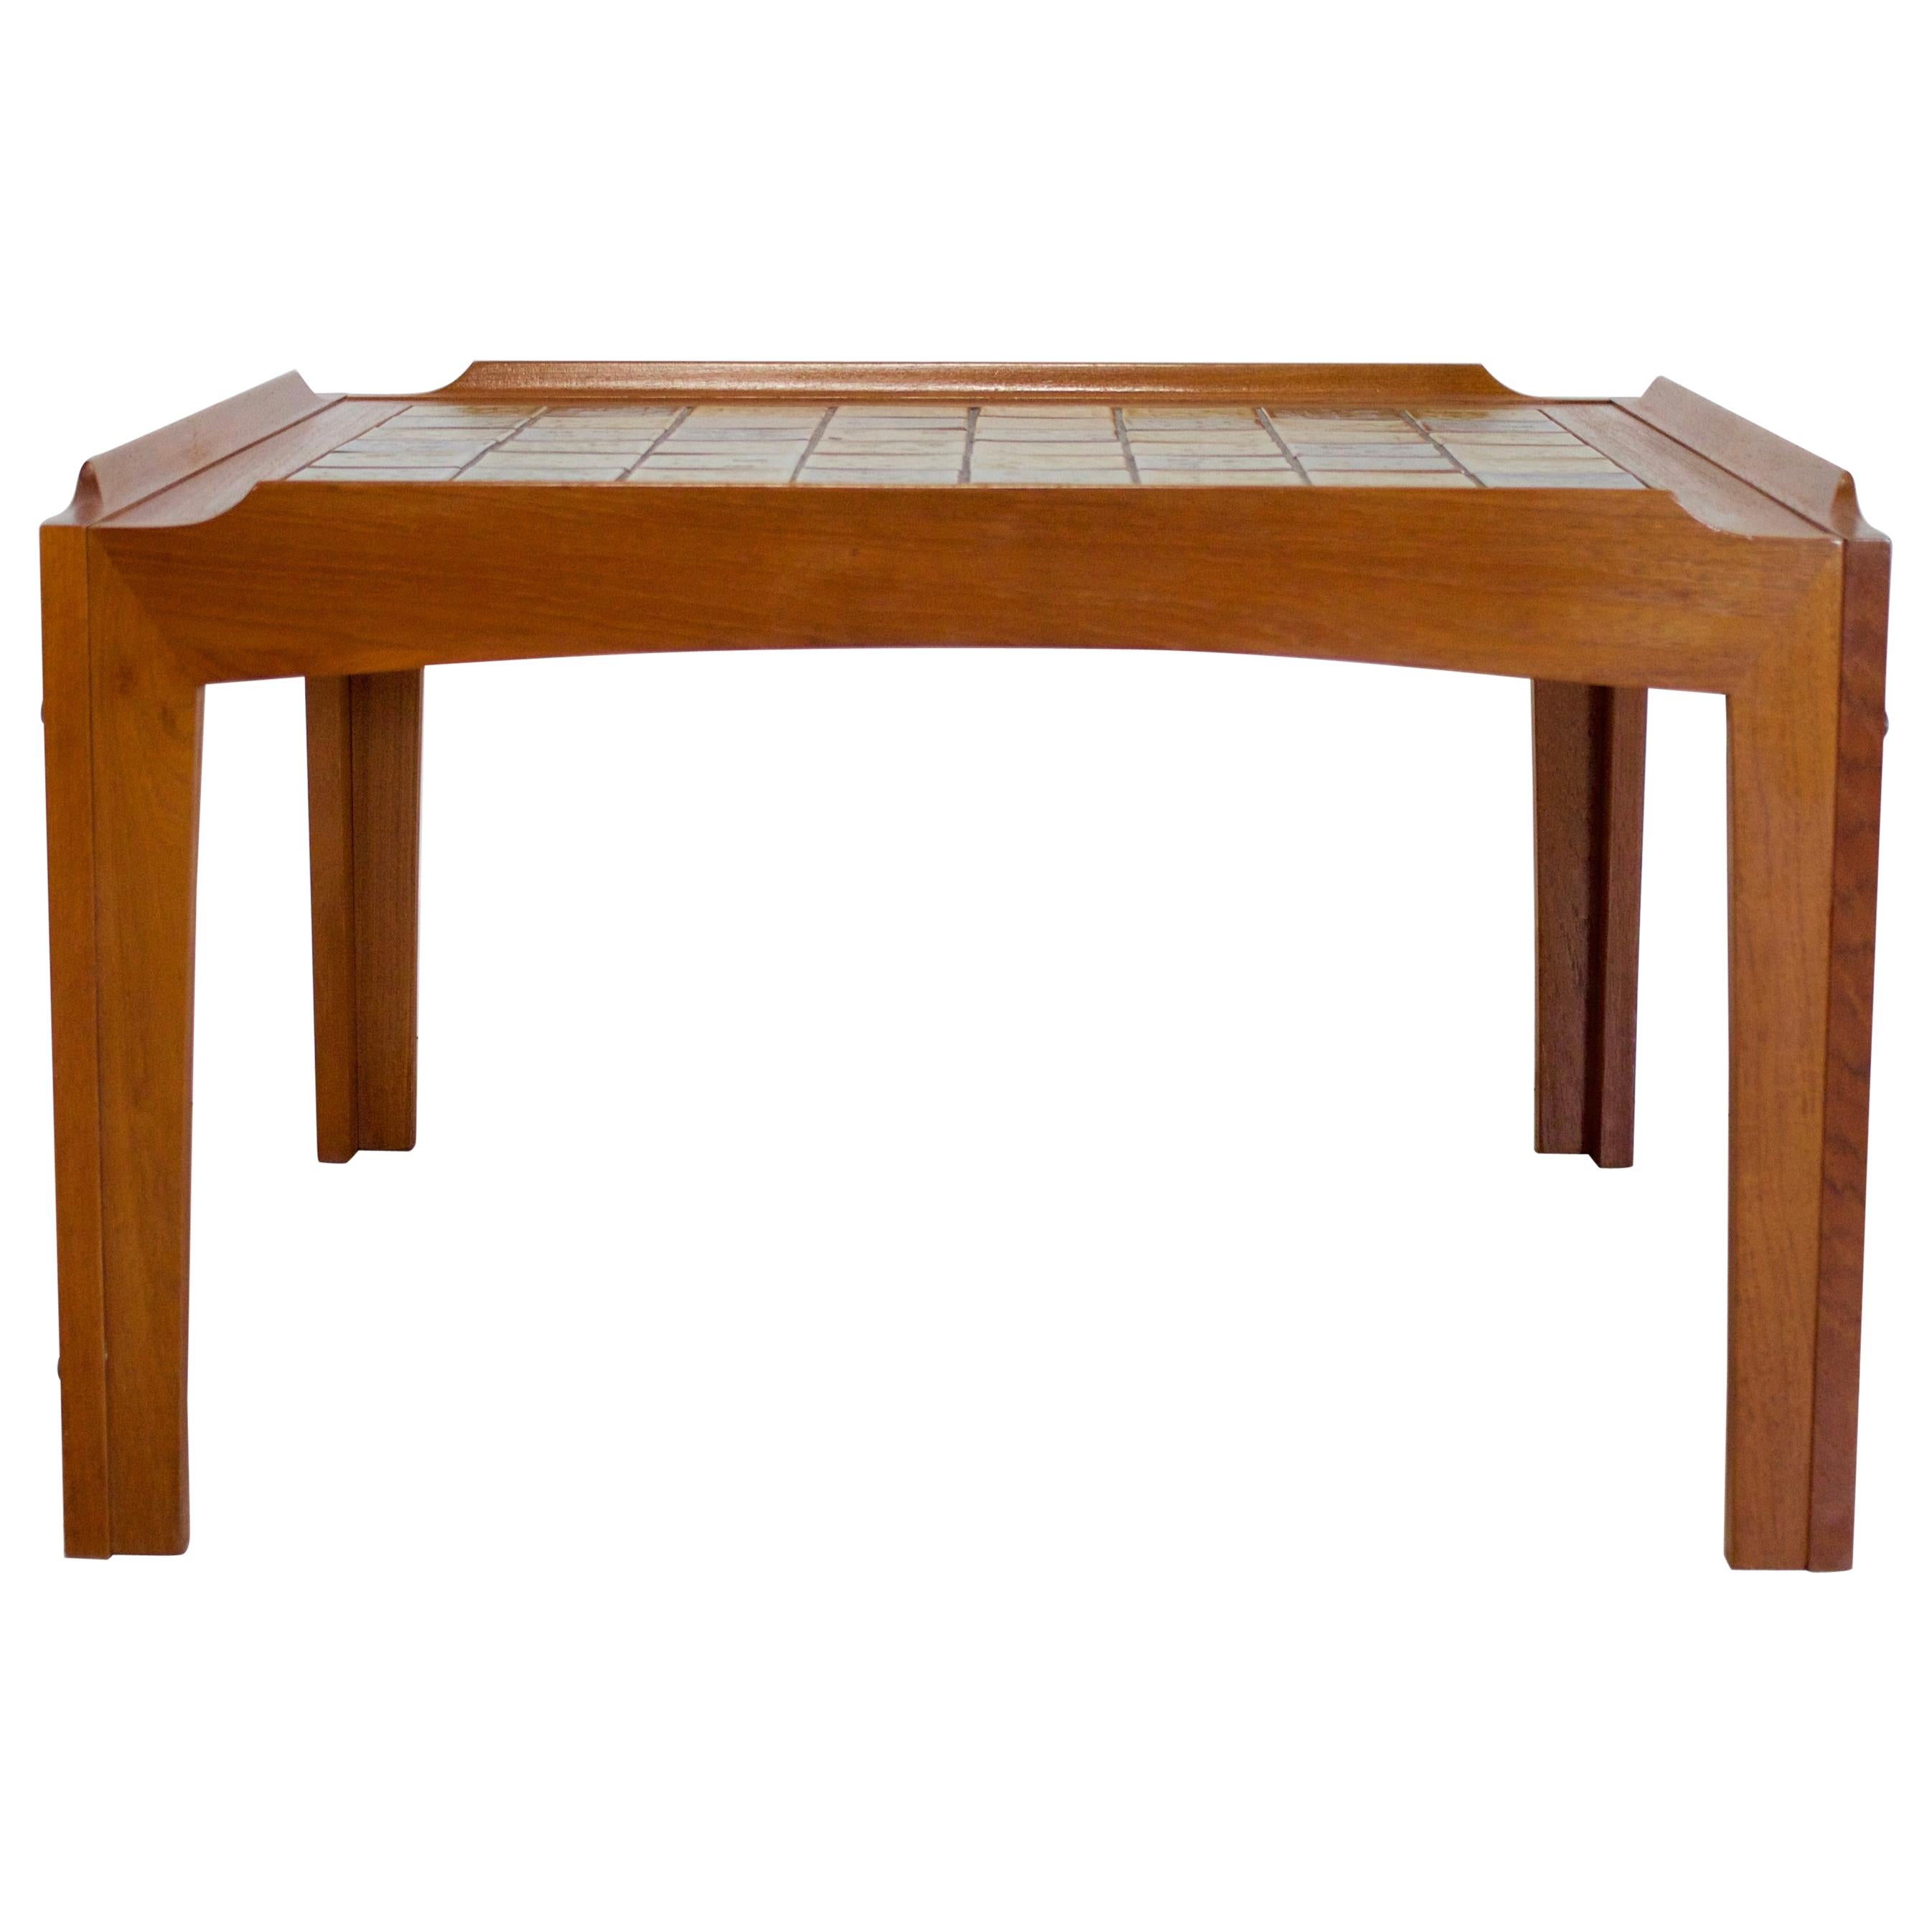 Midcentury Teak Tiled Danish Coffee Table from Trioh For Sale